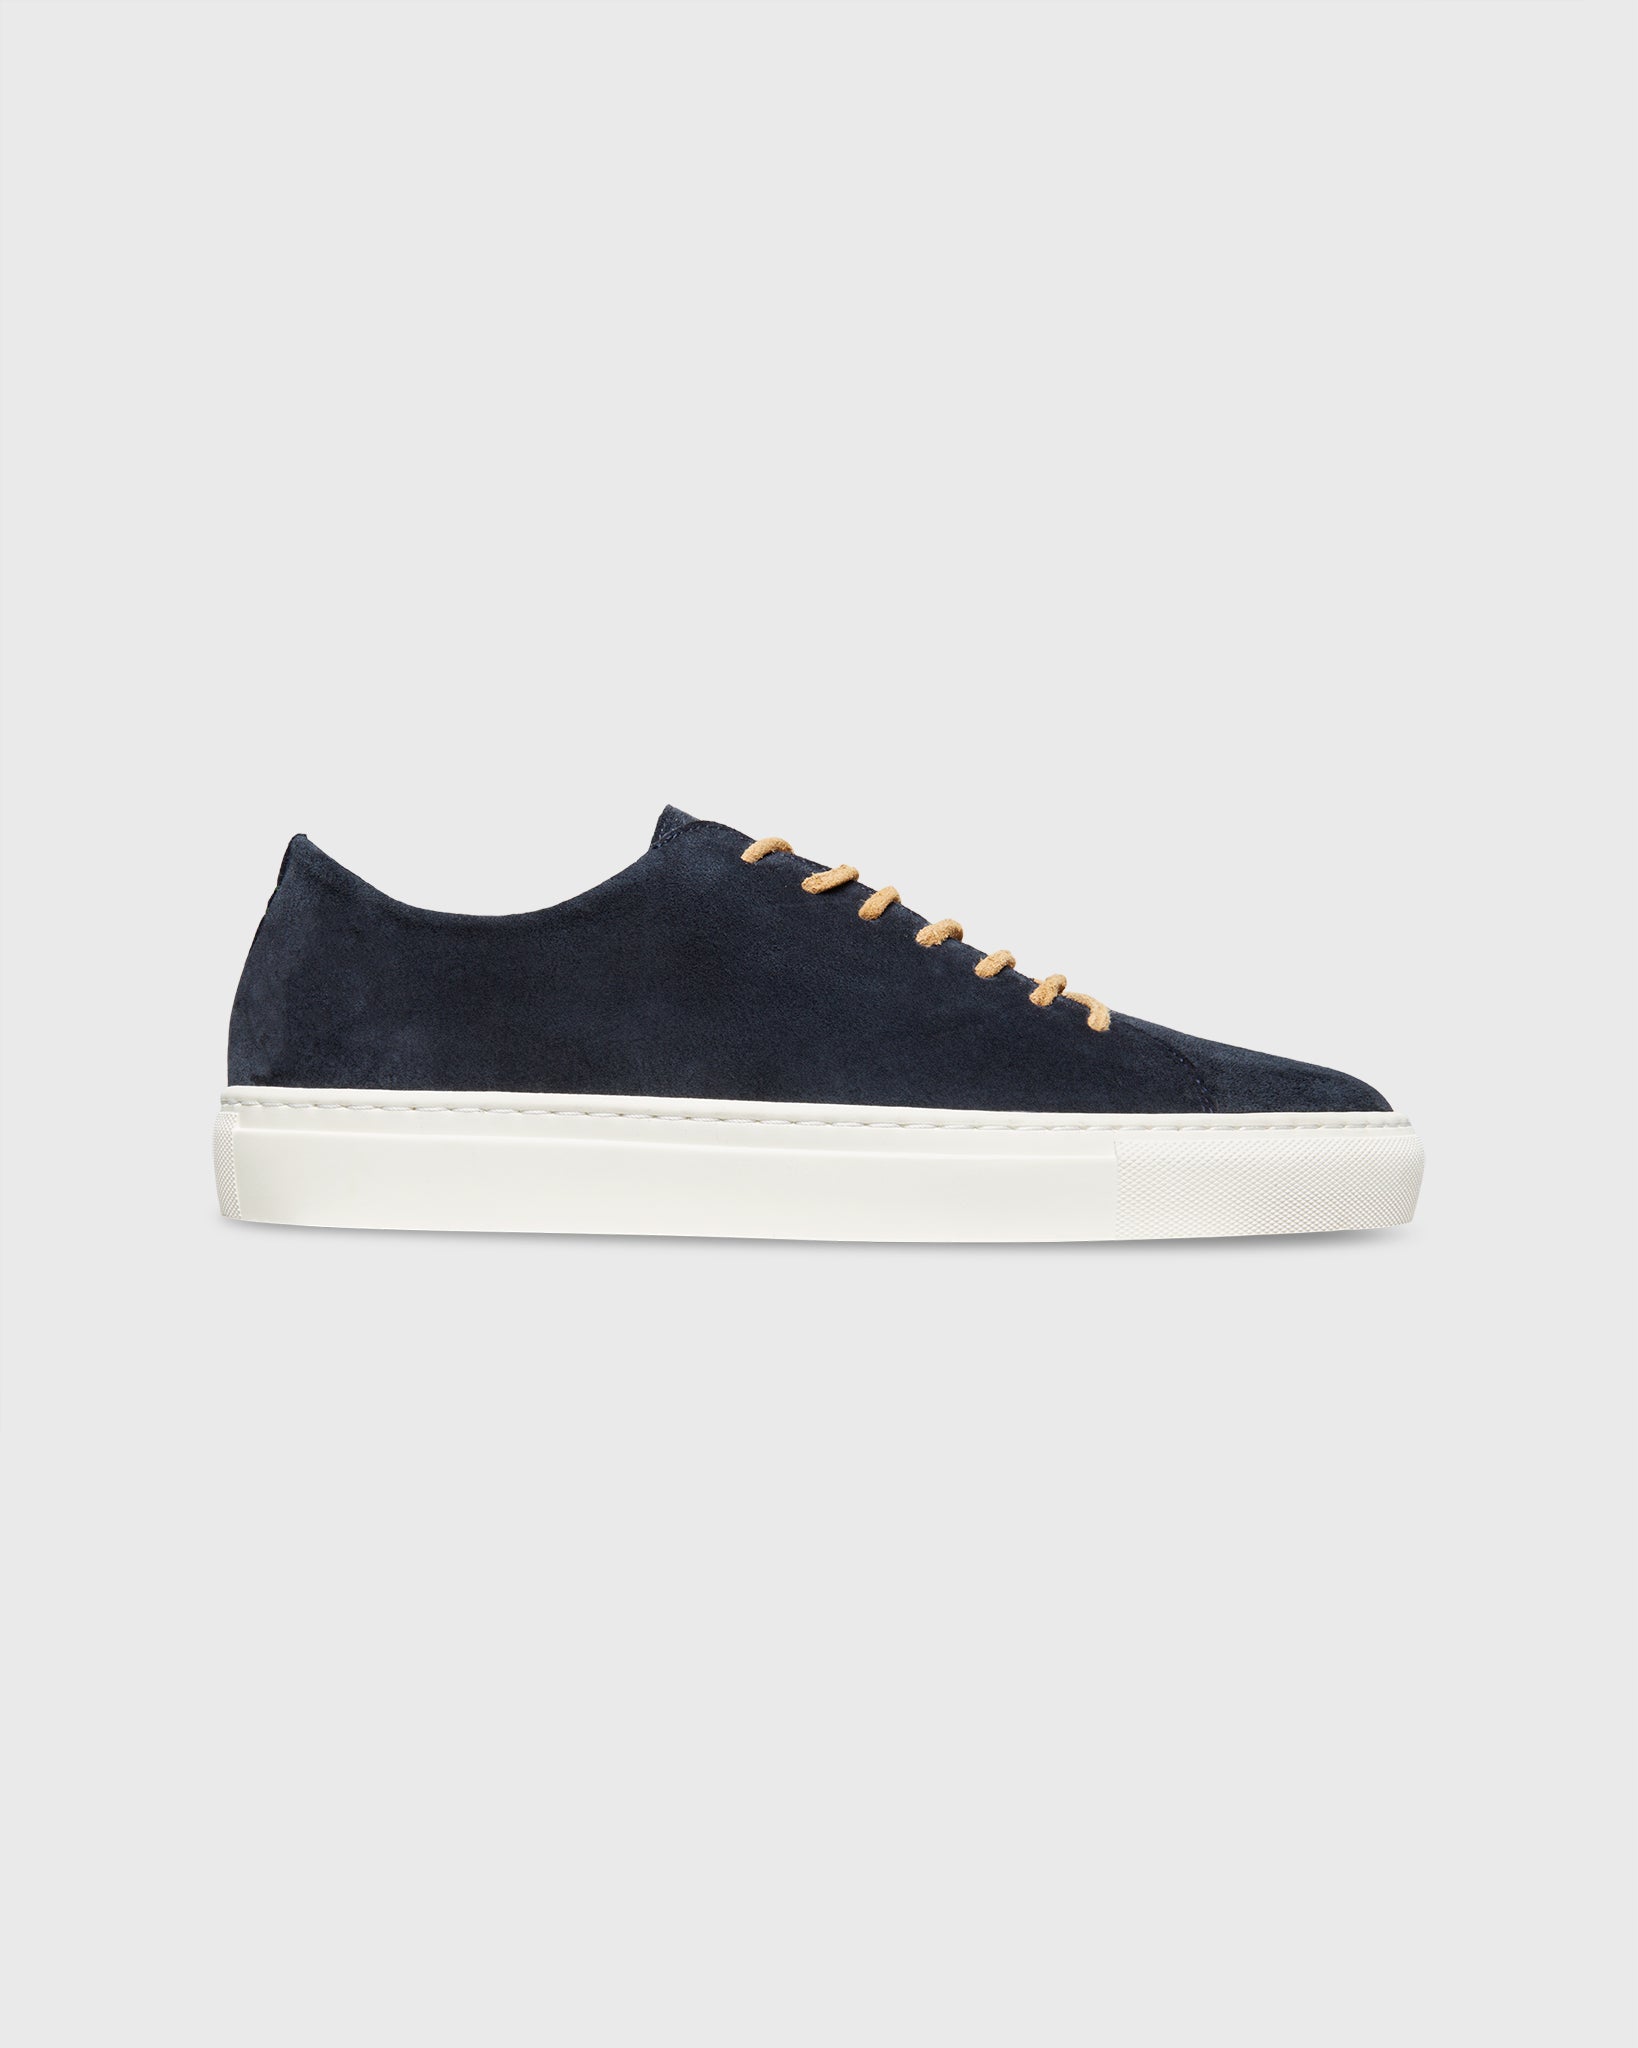 Low-Top Lace-Up Sneaker in Navy Suede | Shop Sid Mashburn